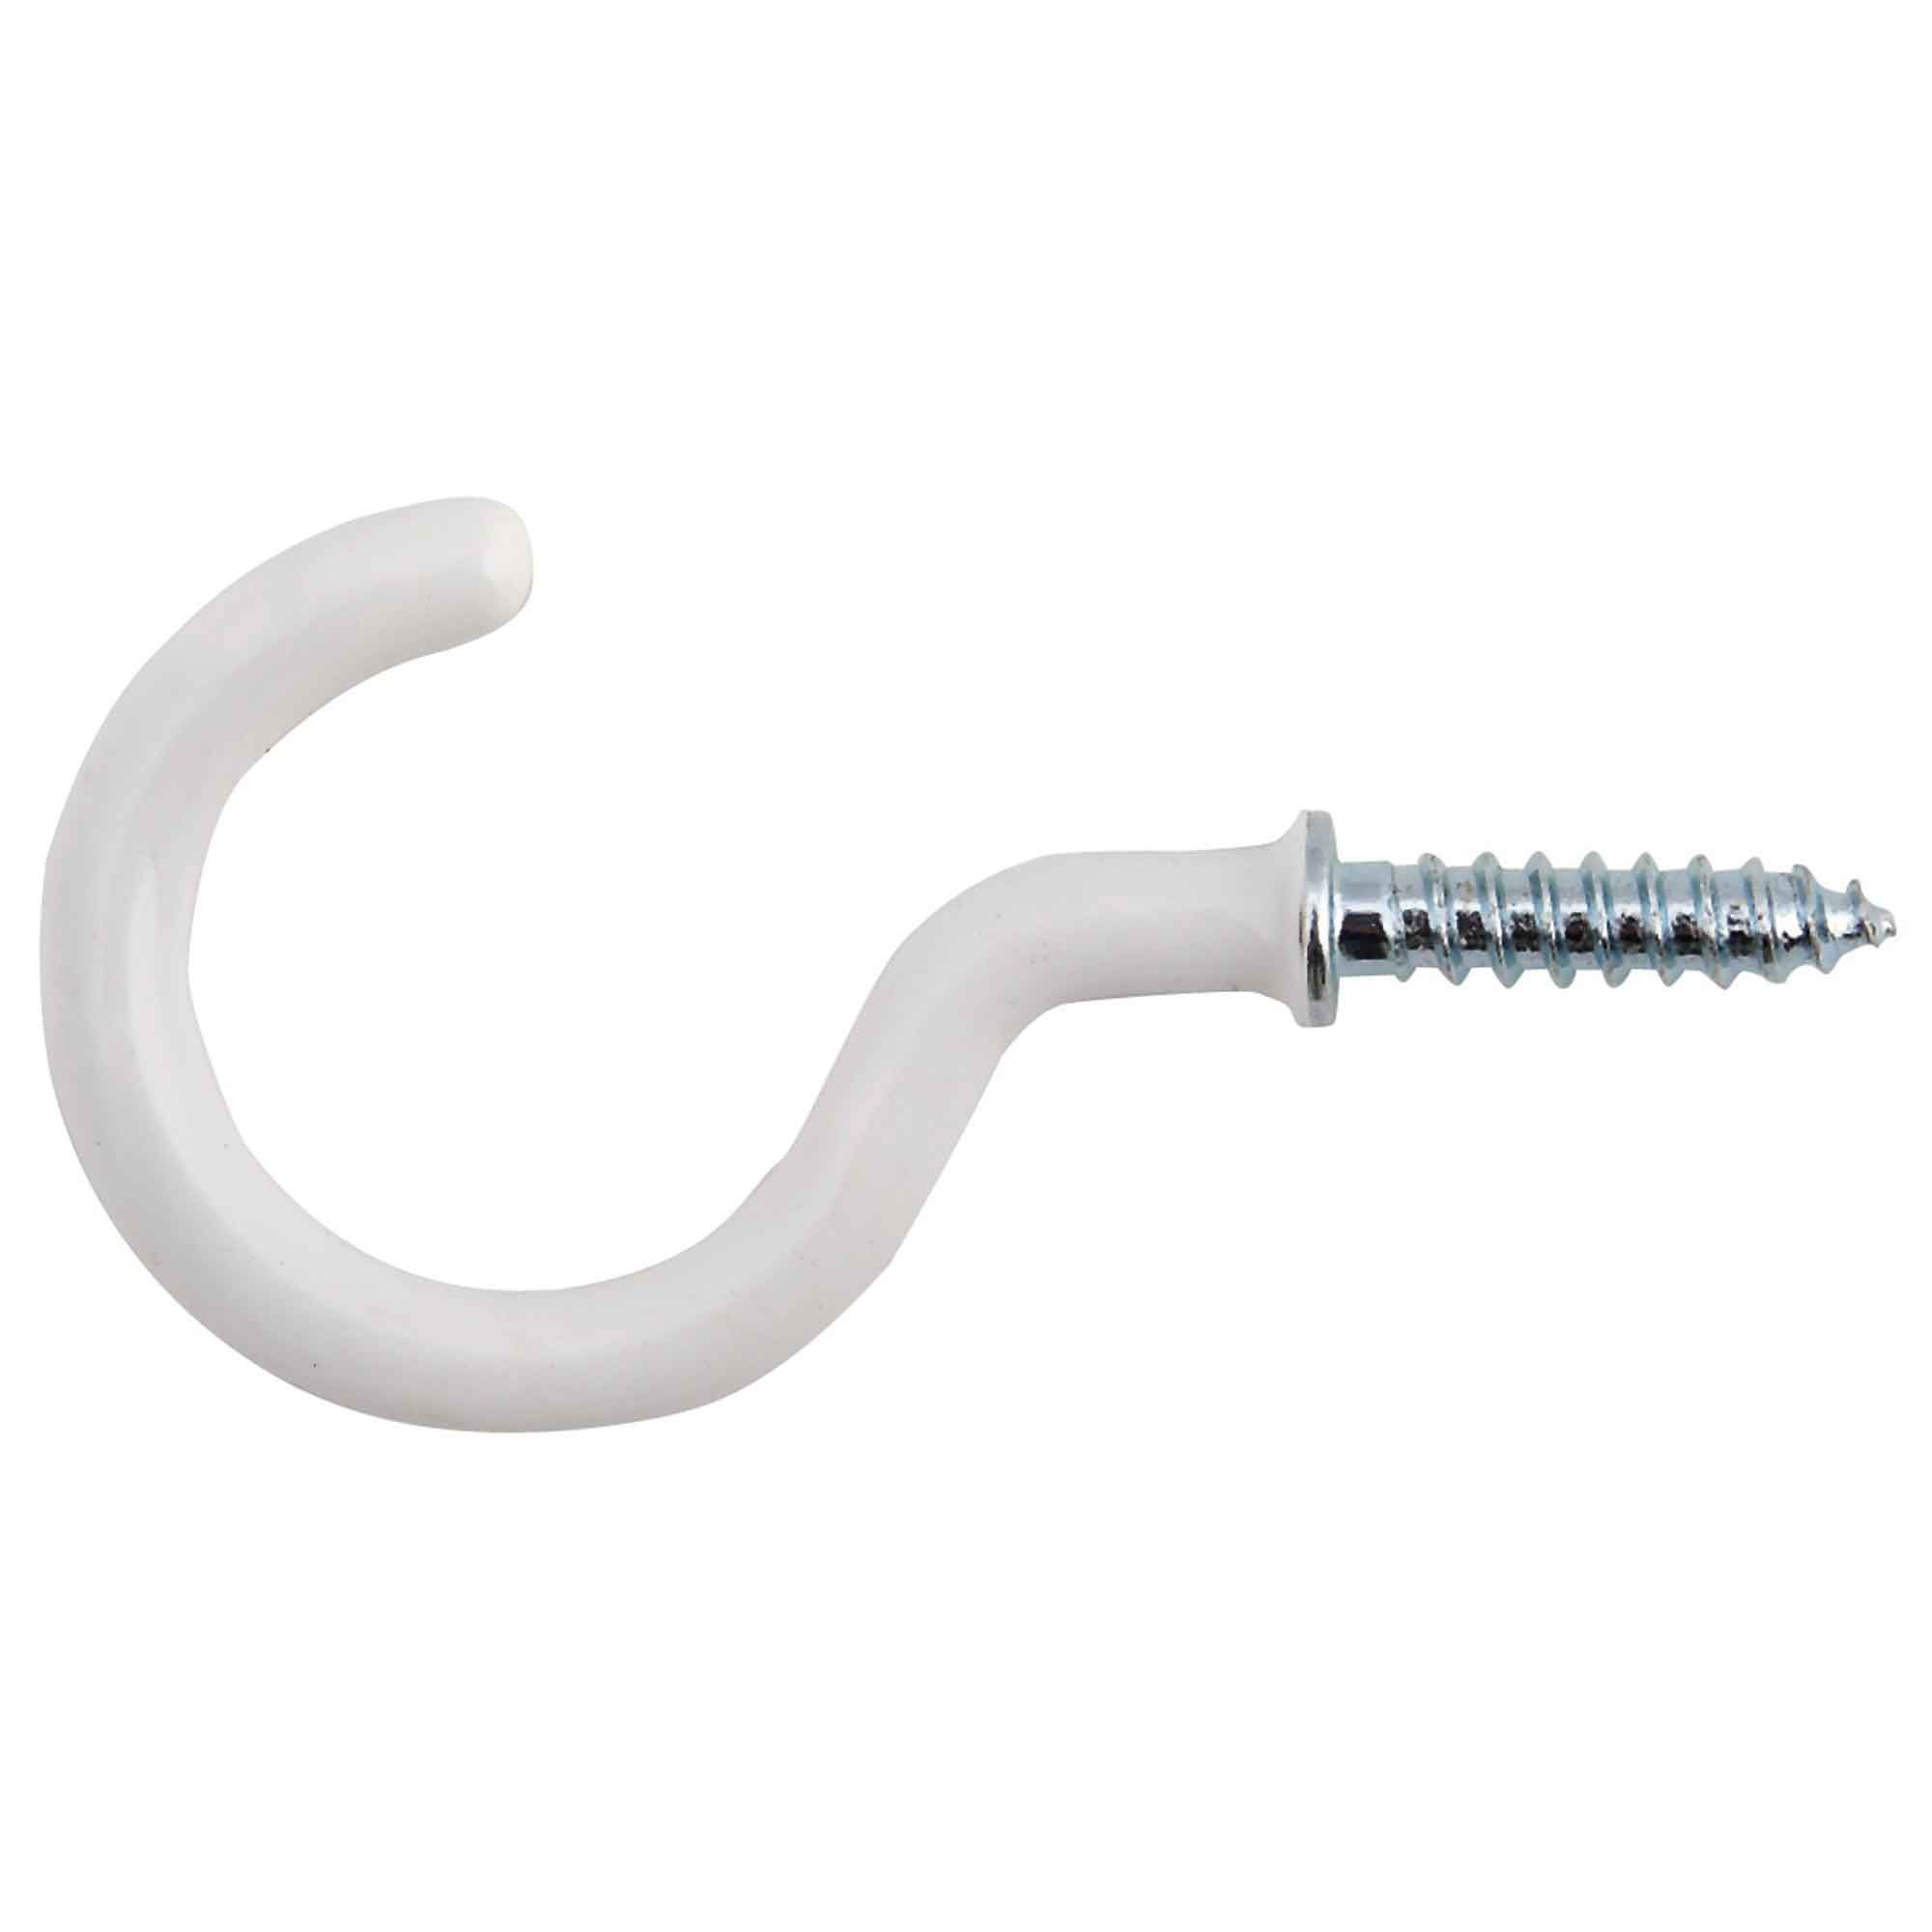 Cup Hook Coated 31mm Pack of 4